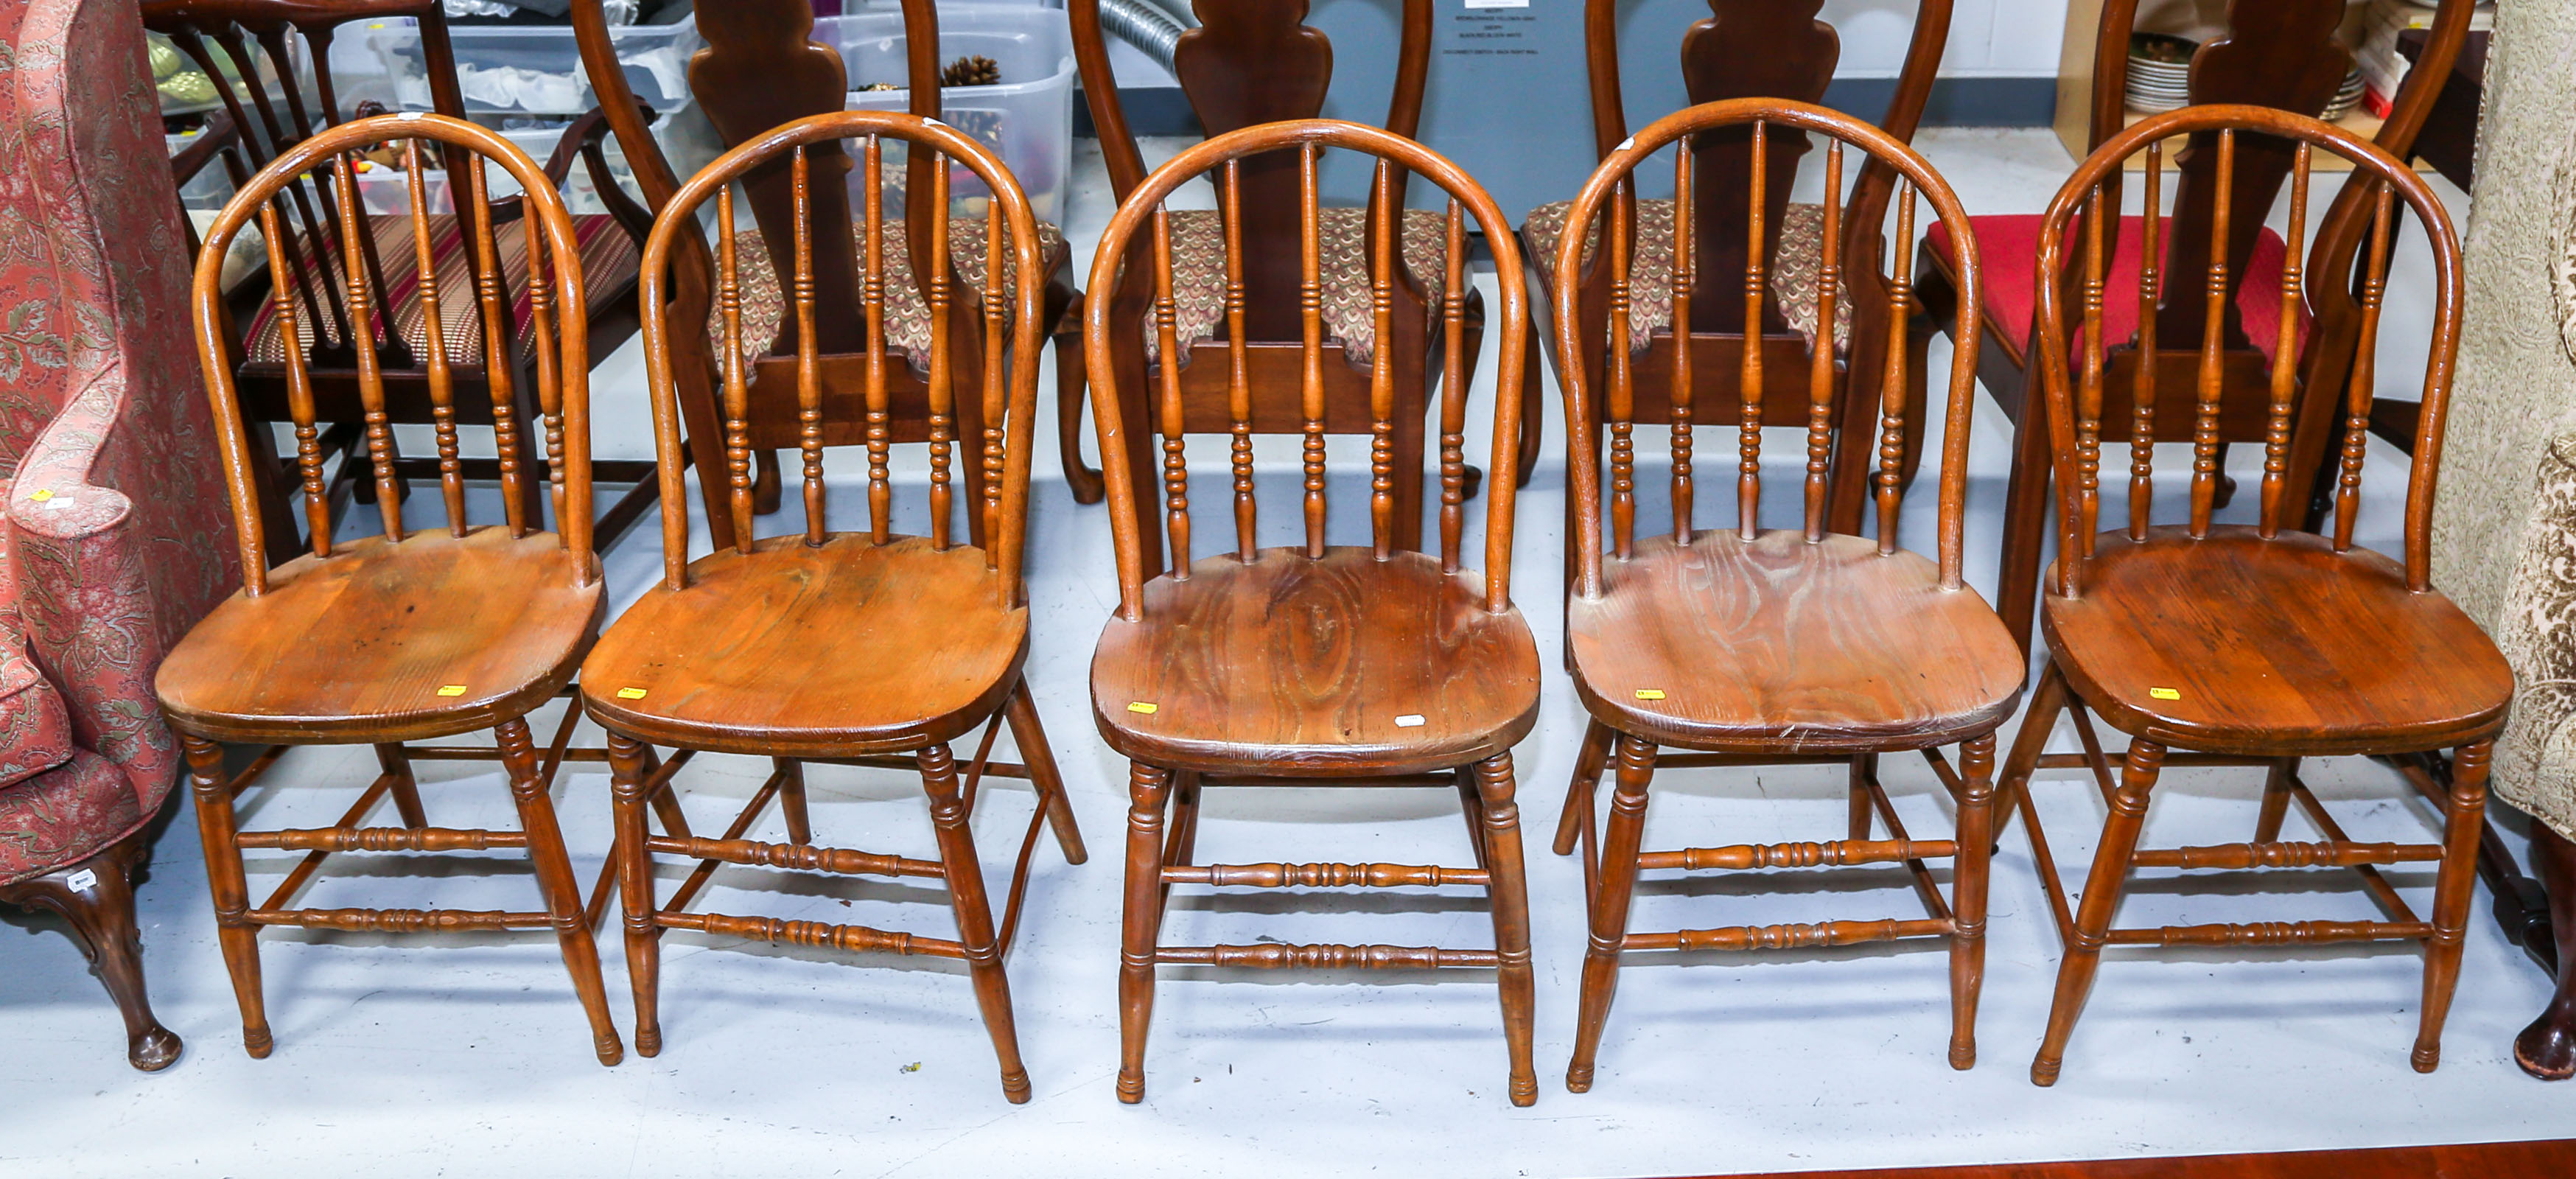 SET OF FIVE HOOPBACK TAVERN CHAIRS 3088dd